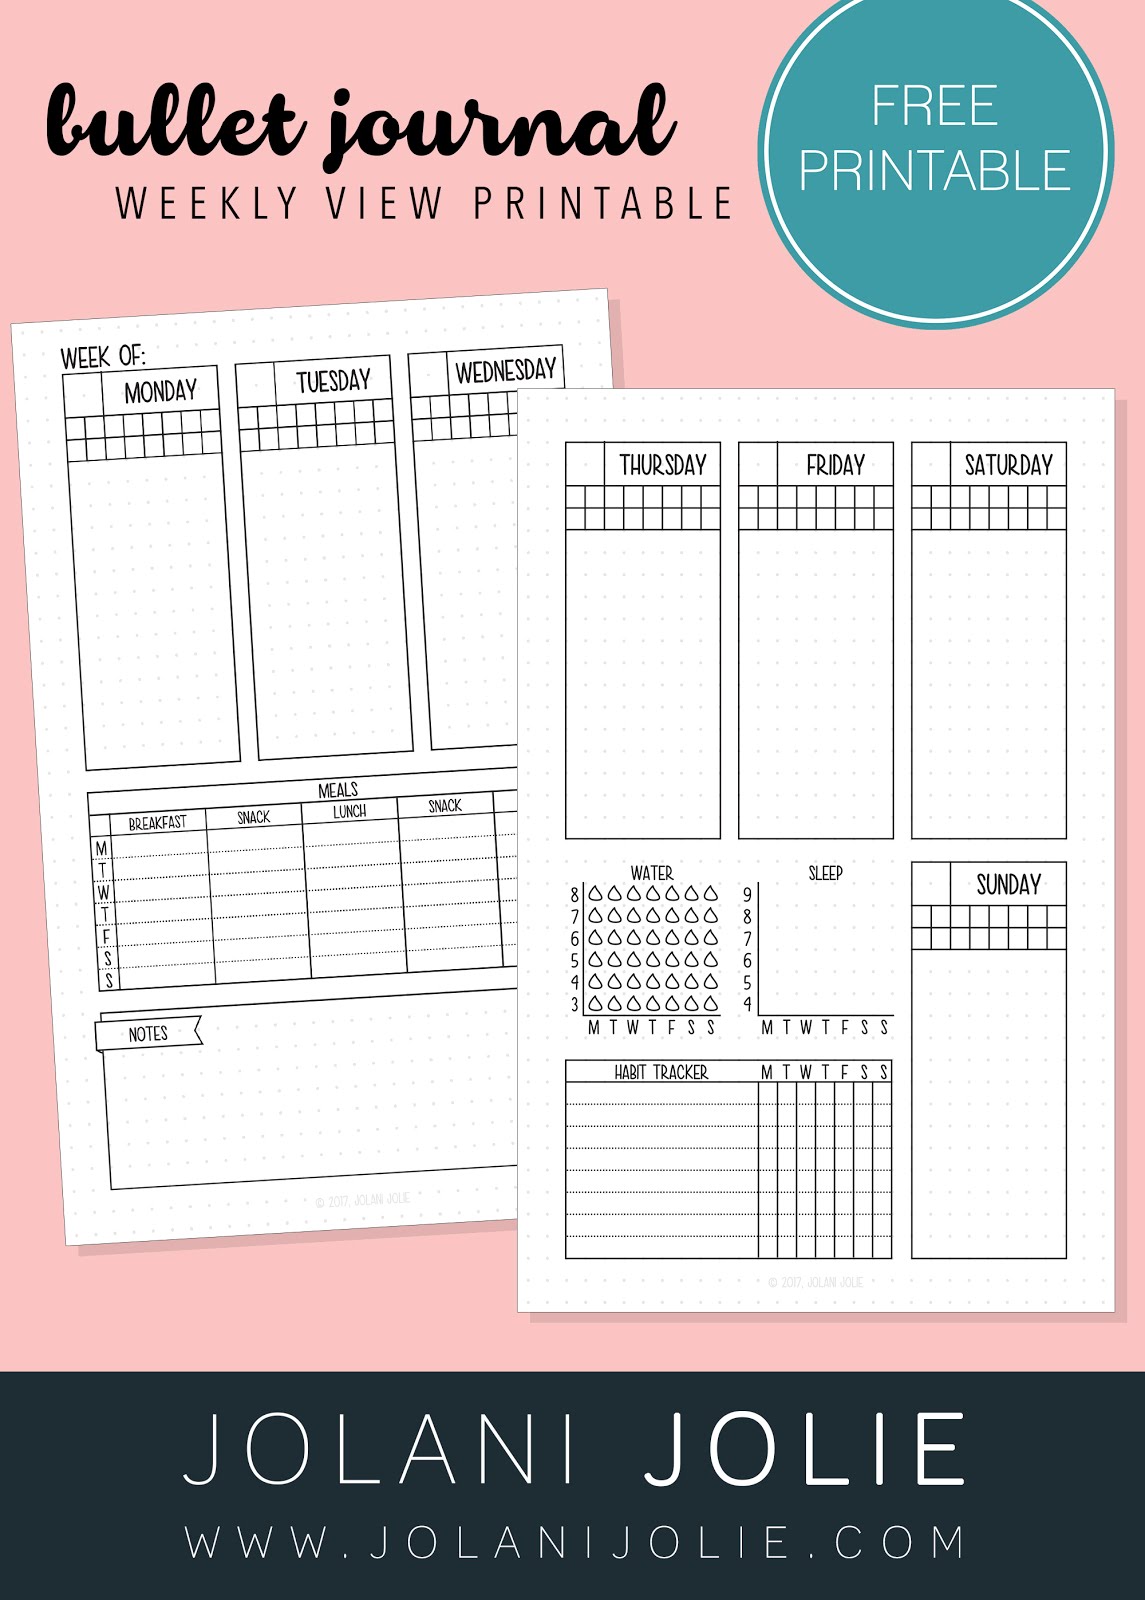 Free Printable Weekly Bullet Journal Overview With Sleep Water 